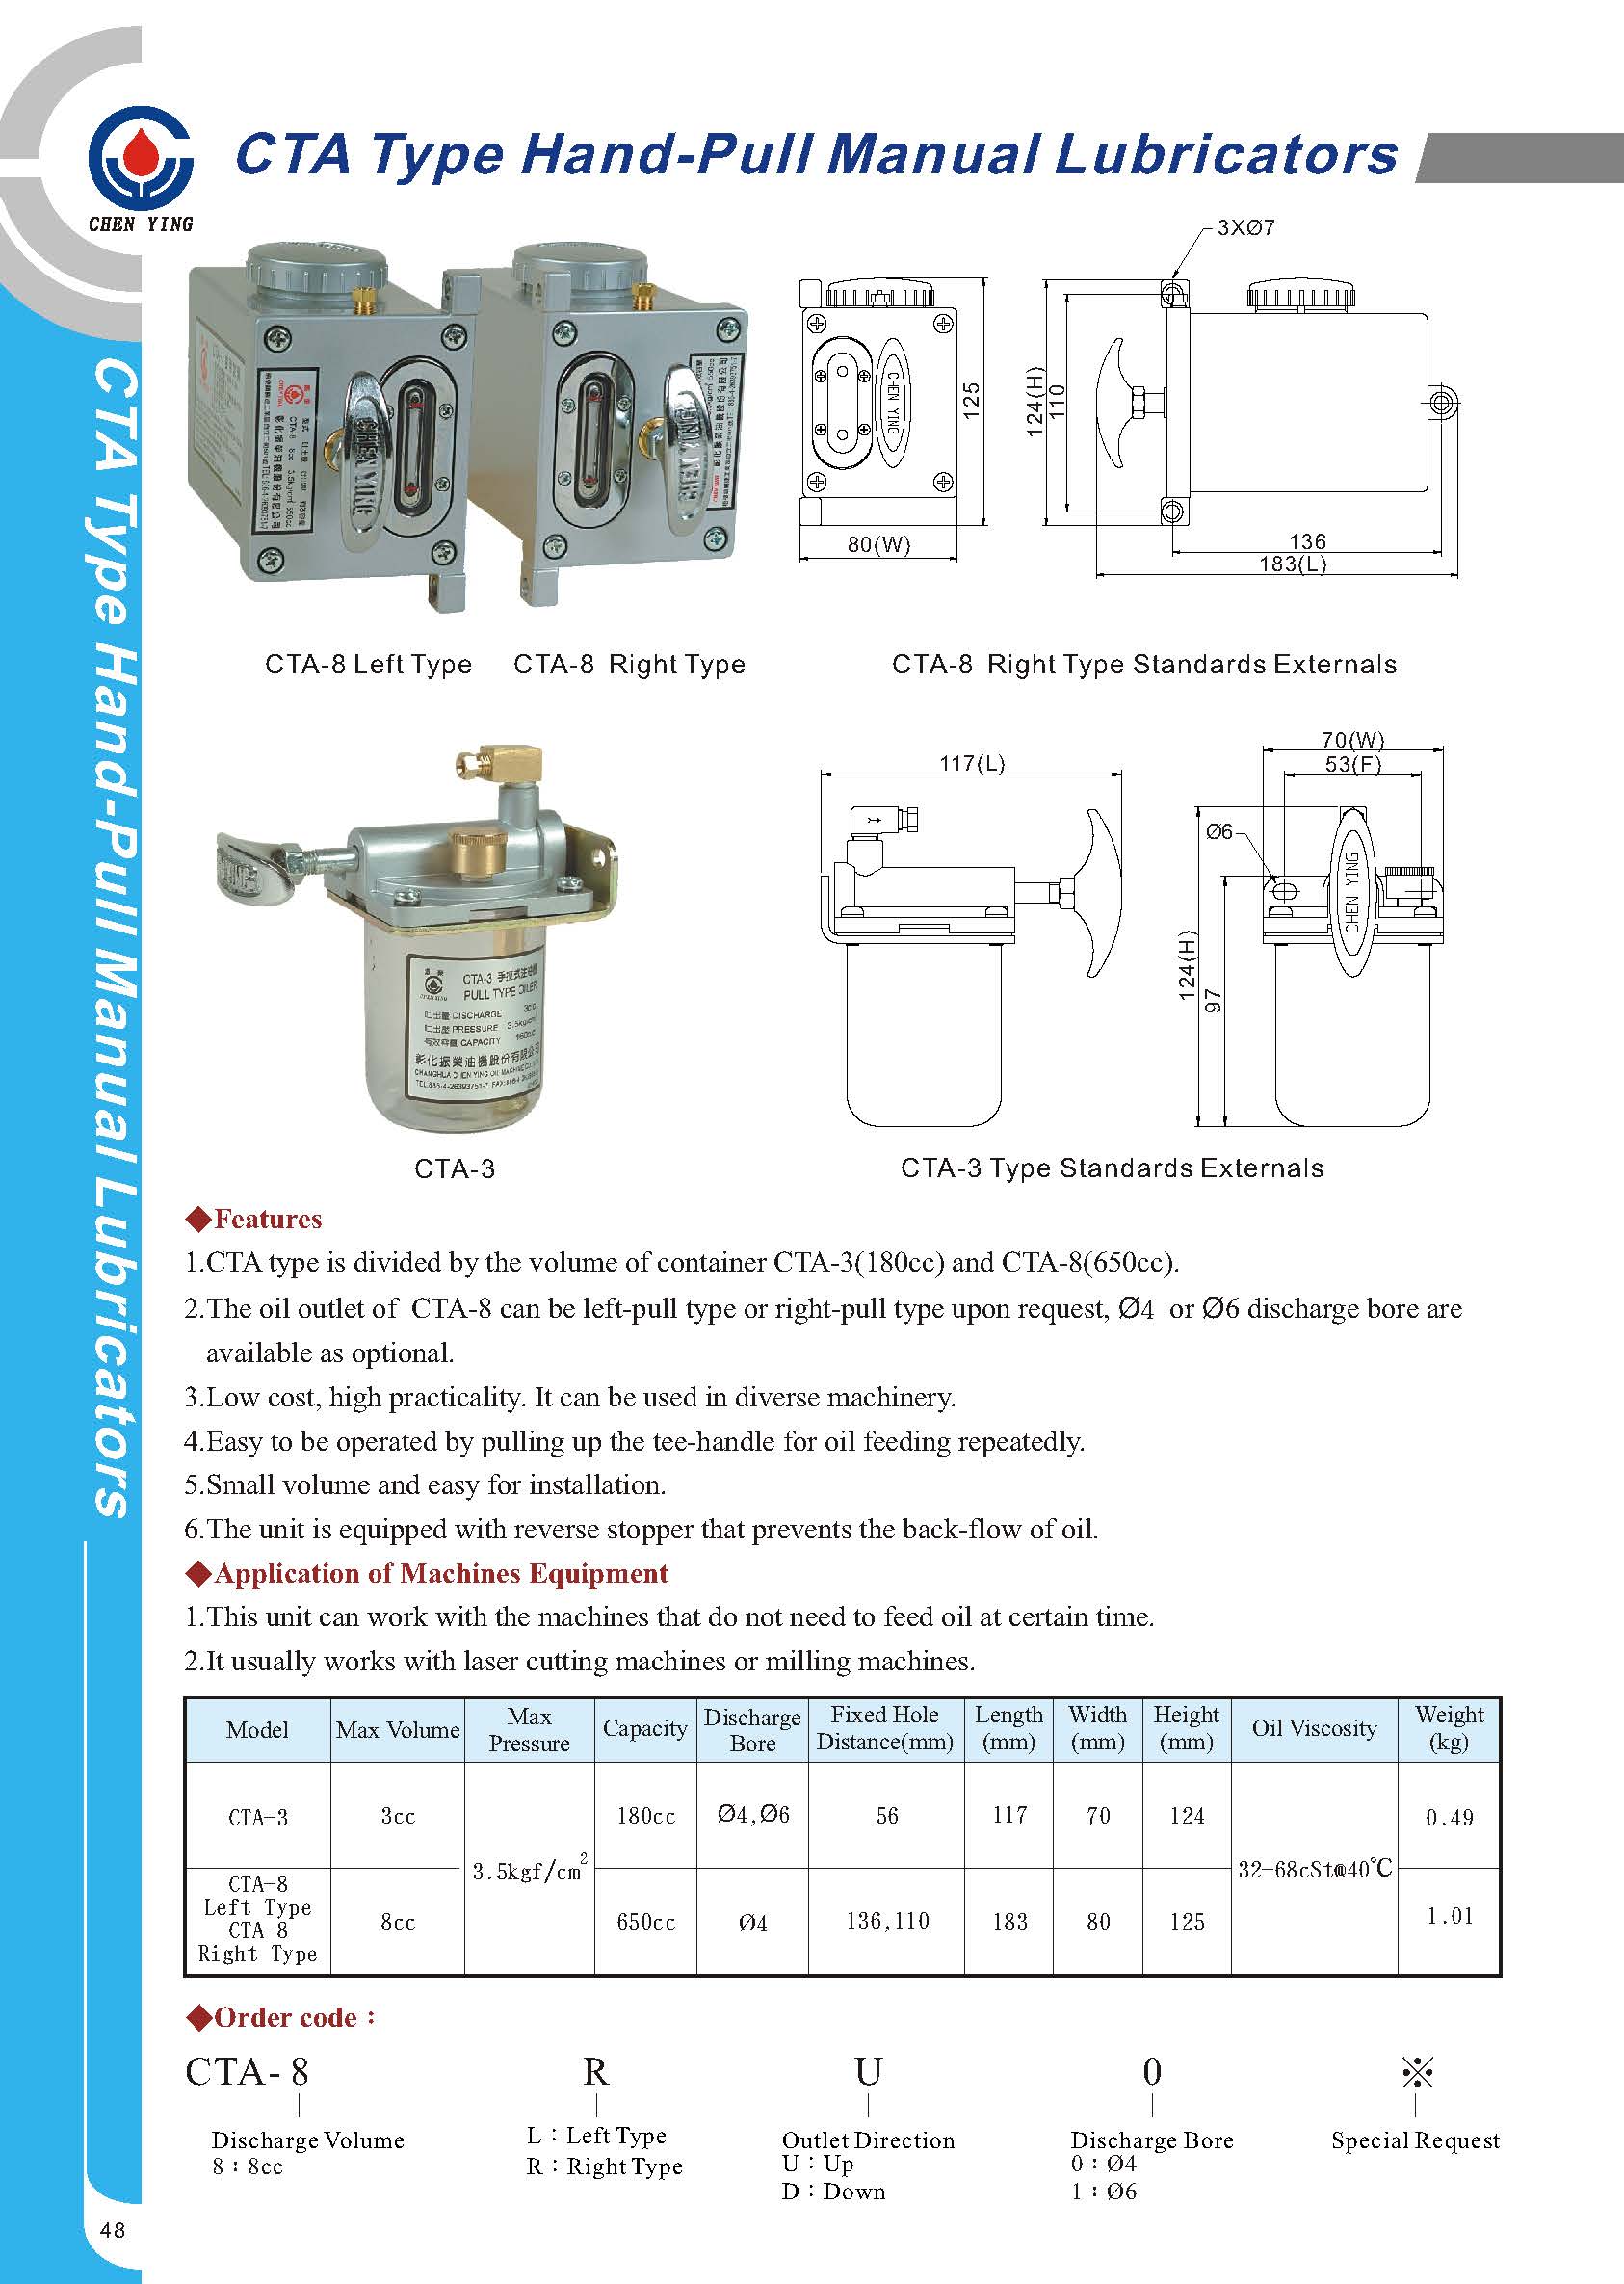 Chen Ying CTA Type Hand-pull Manual Lubricators Cta-3 for sale online 